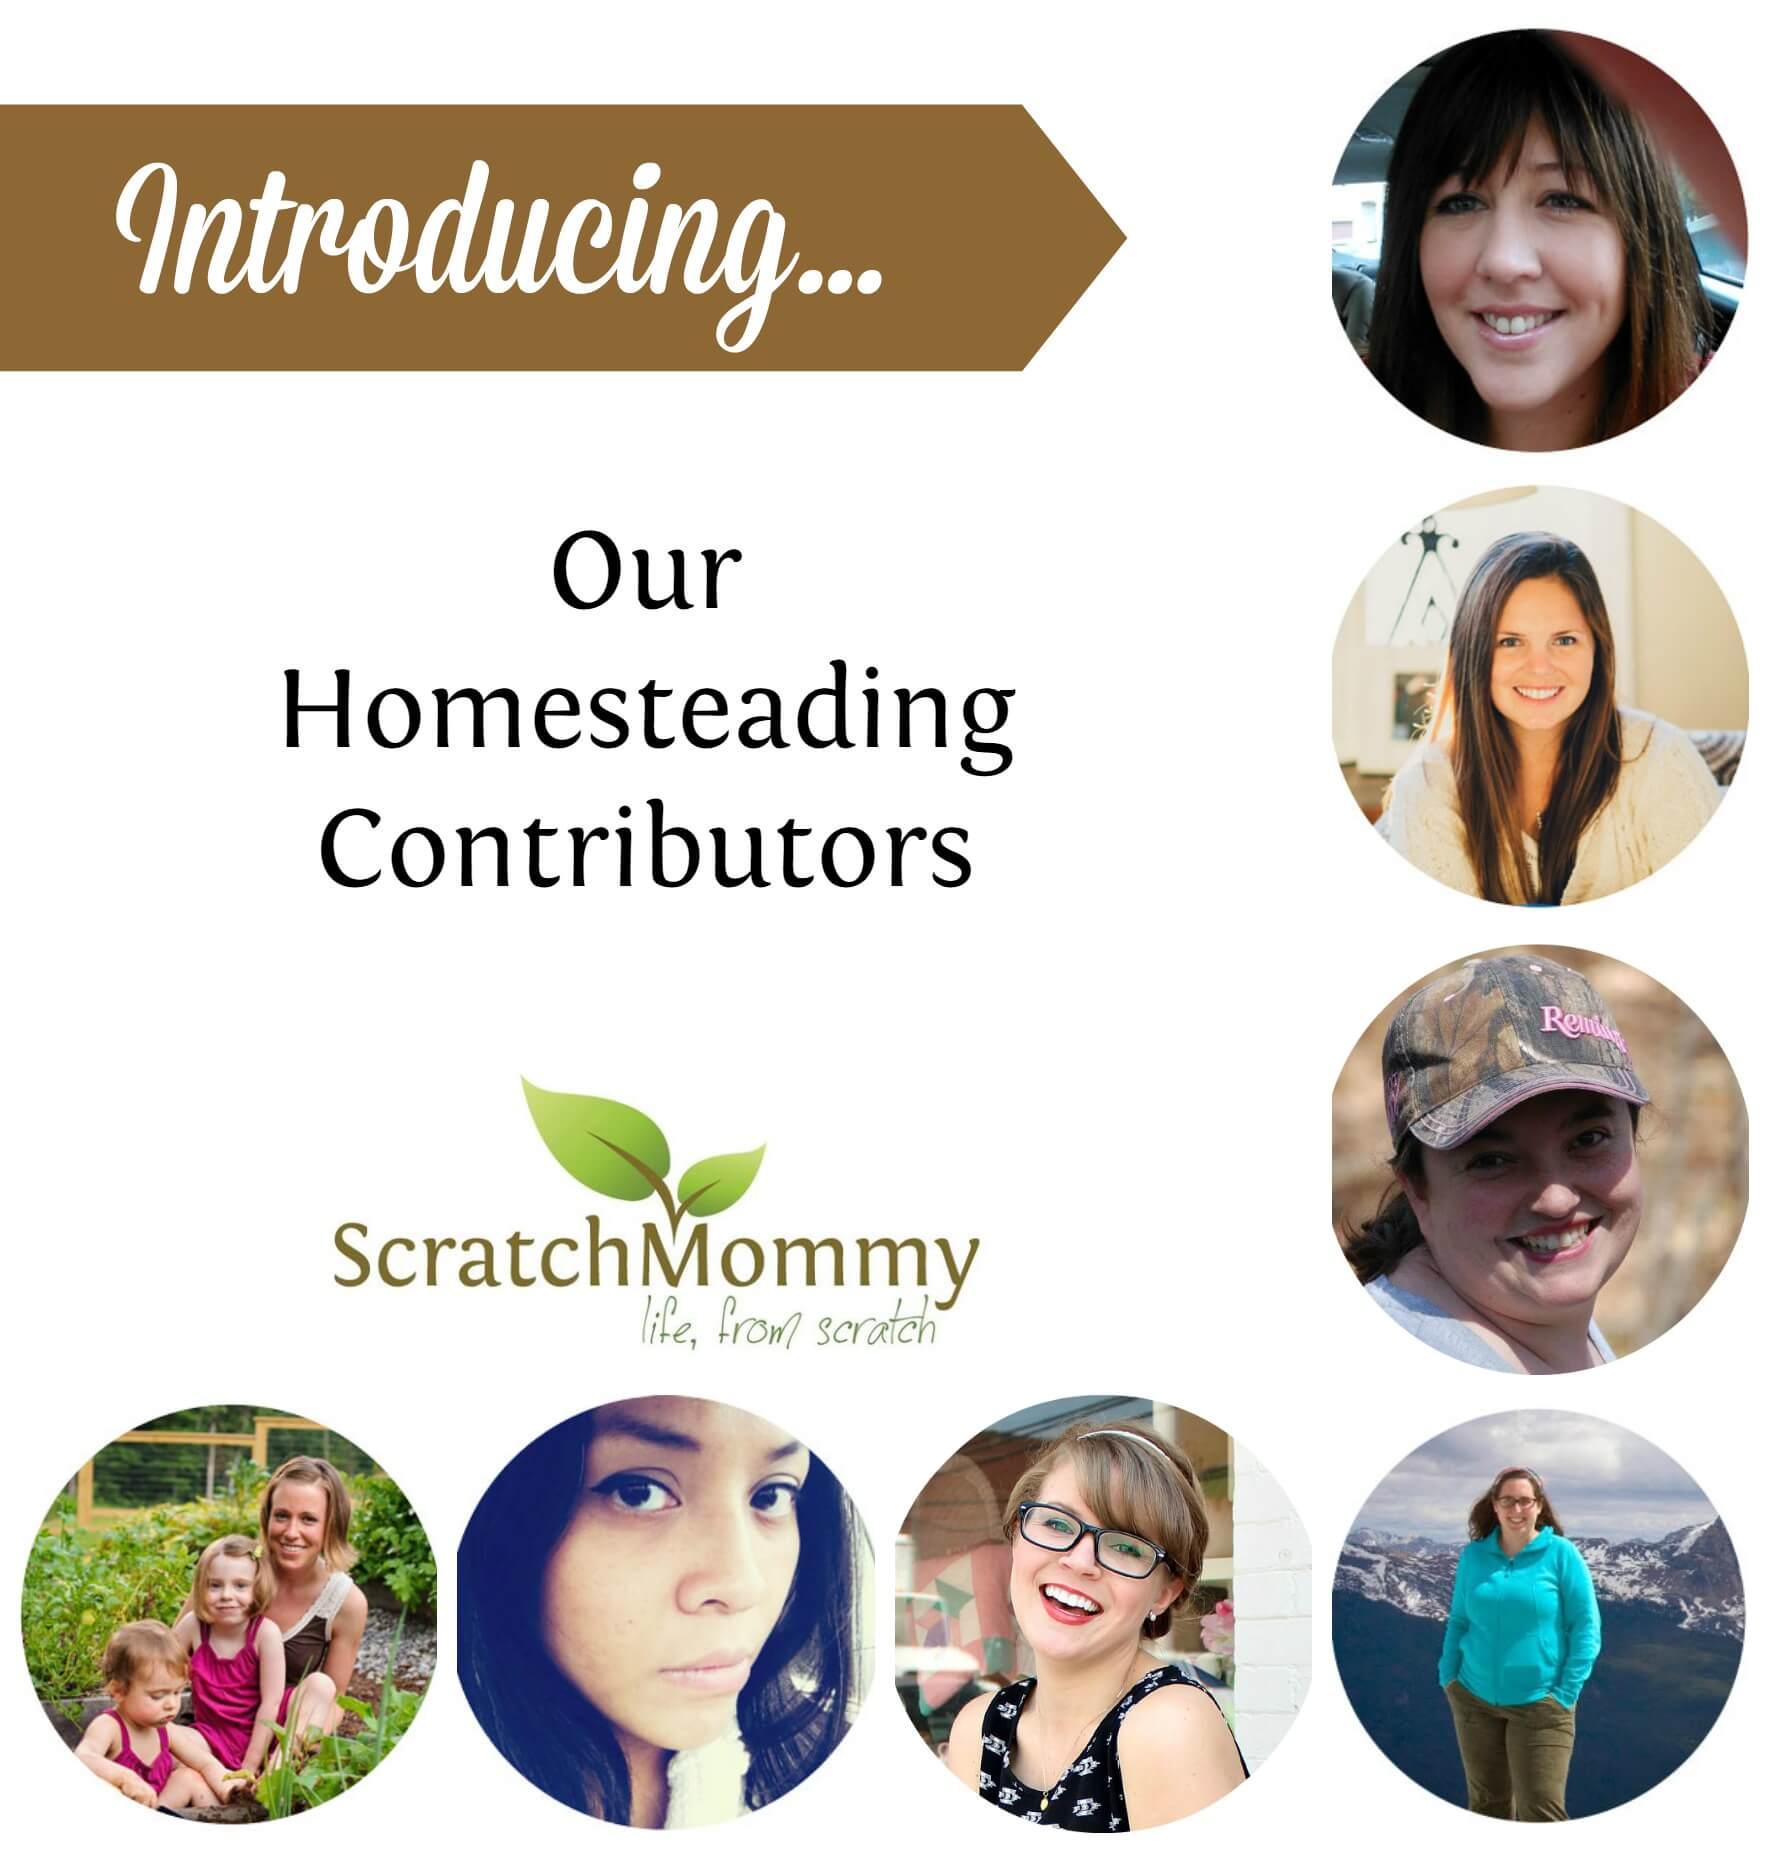 Meet our very talented homesteading contributors for the re-birth of Scratch Mommy!